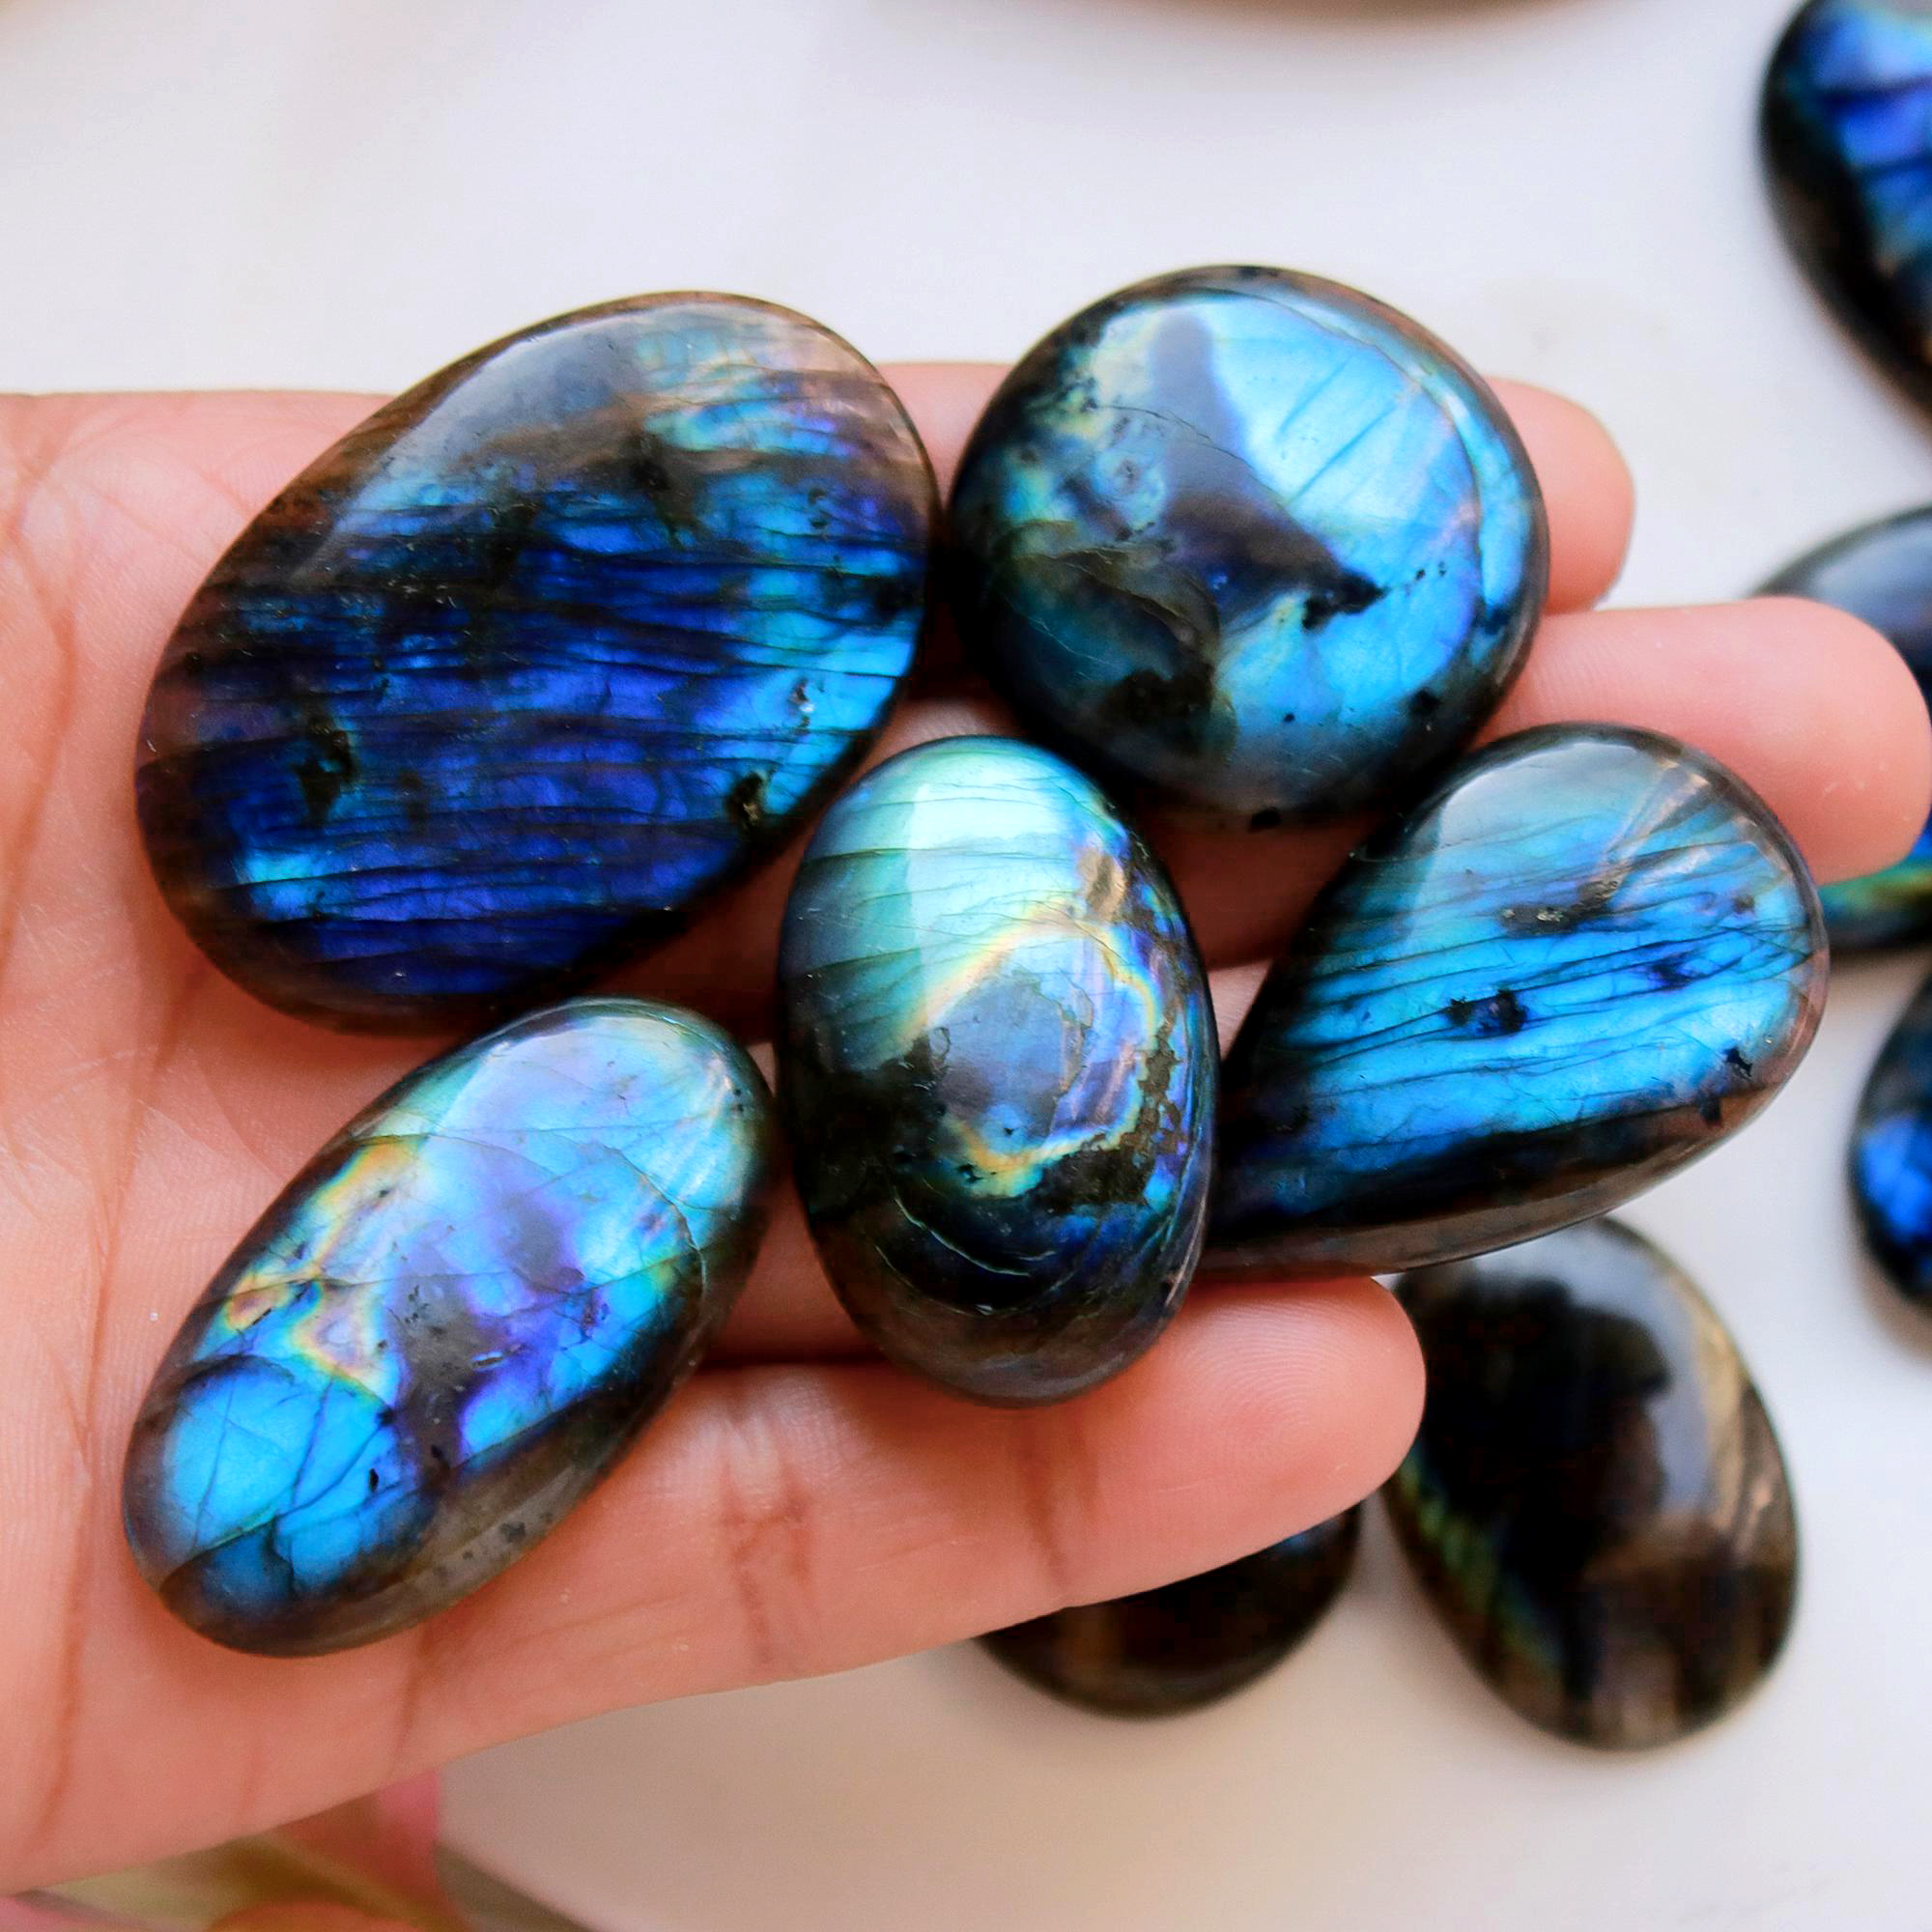 13 Pcs.750 Cts Natural labradorite Cabochon Loose Gemstone For Jewelry Wholesale Lot Size 55x31 33x25mm